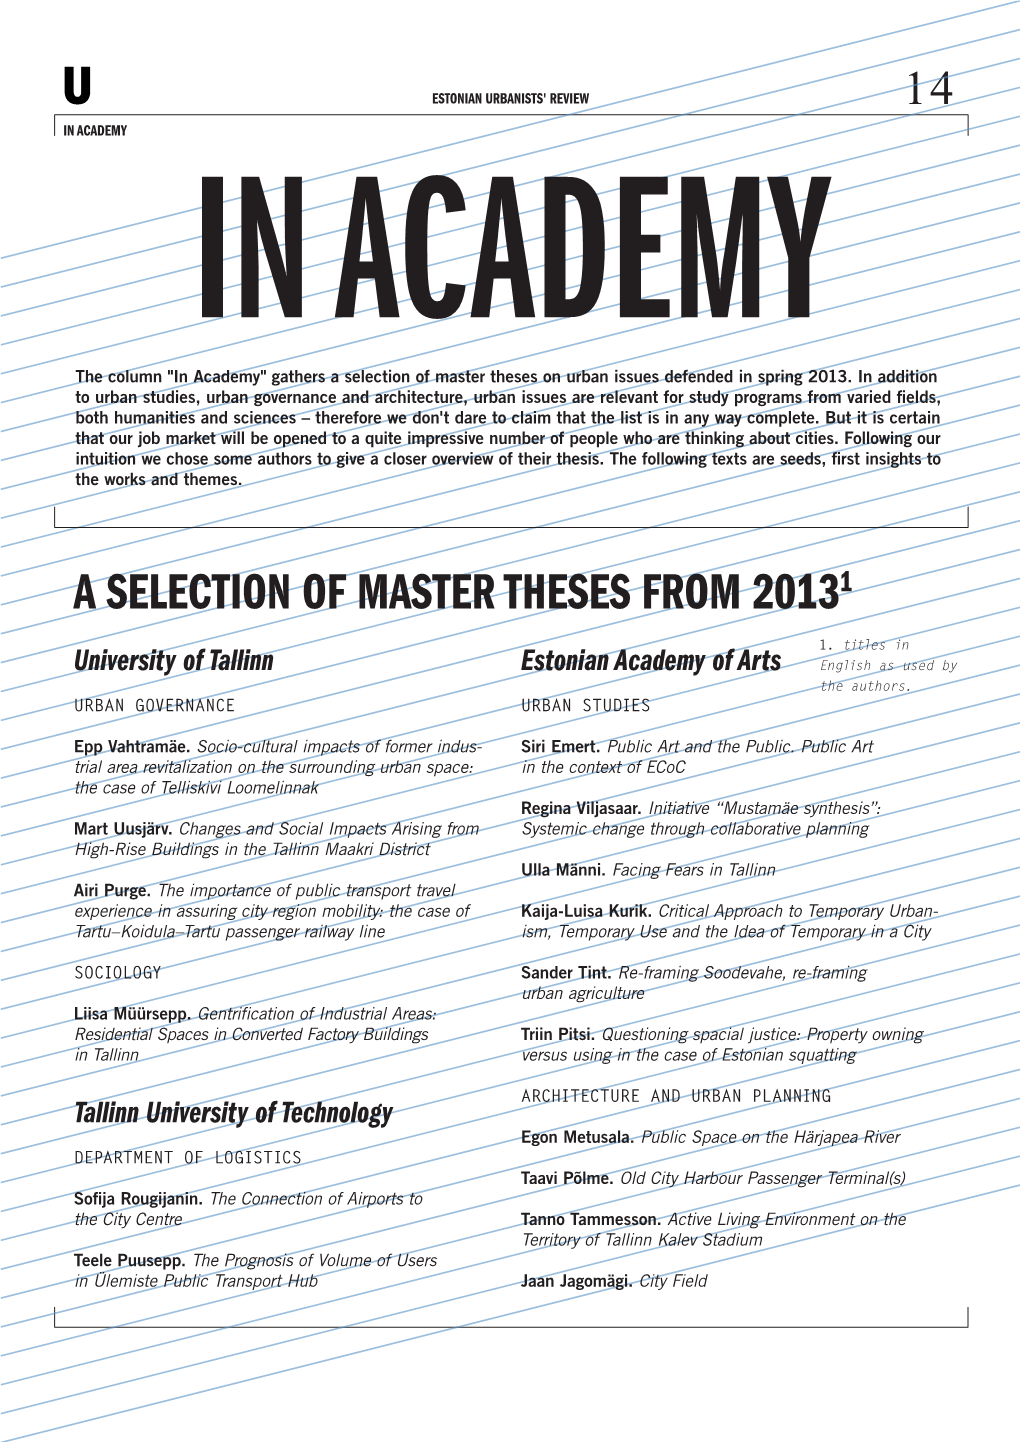 A Selection of Master Theses from 20131